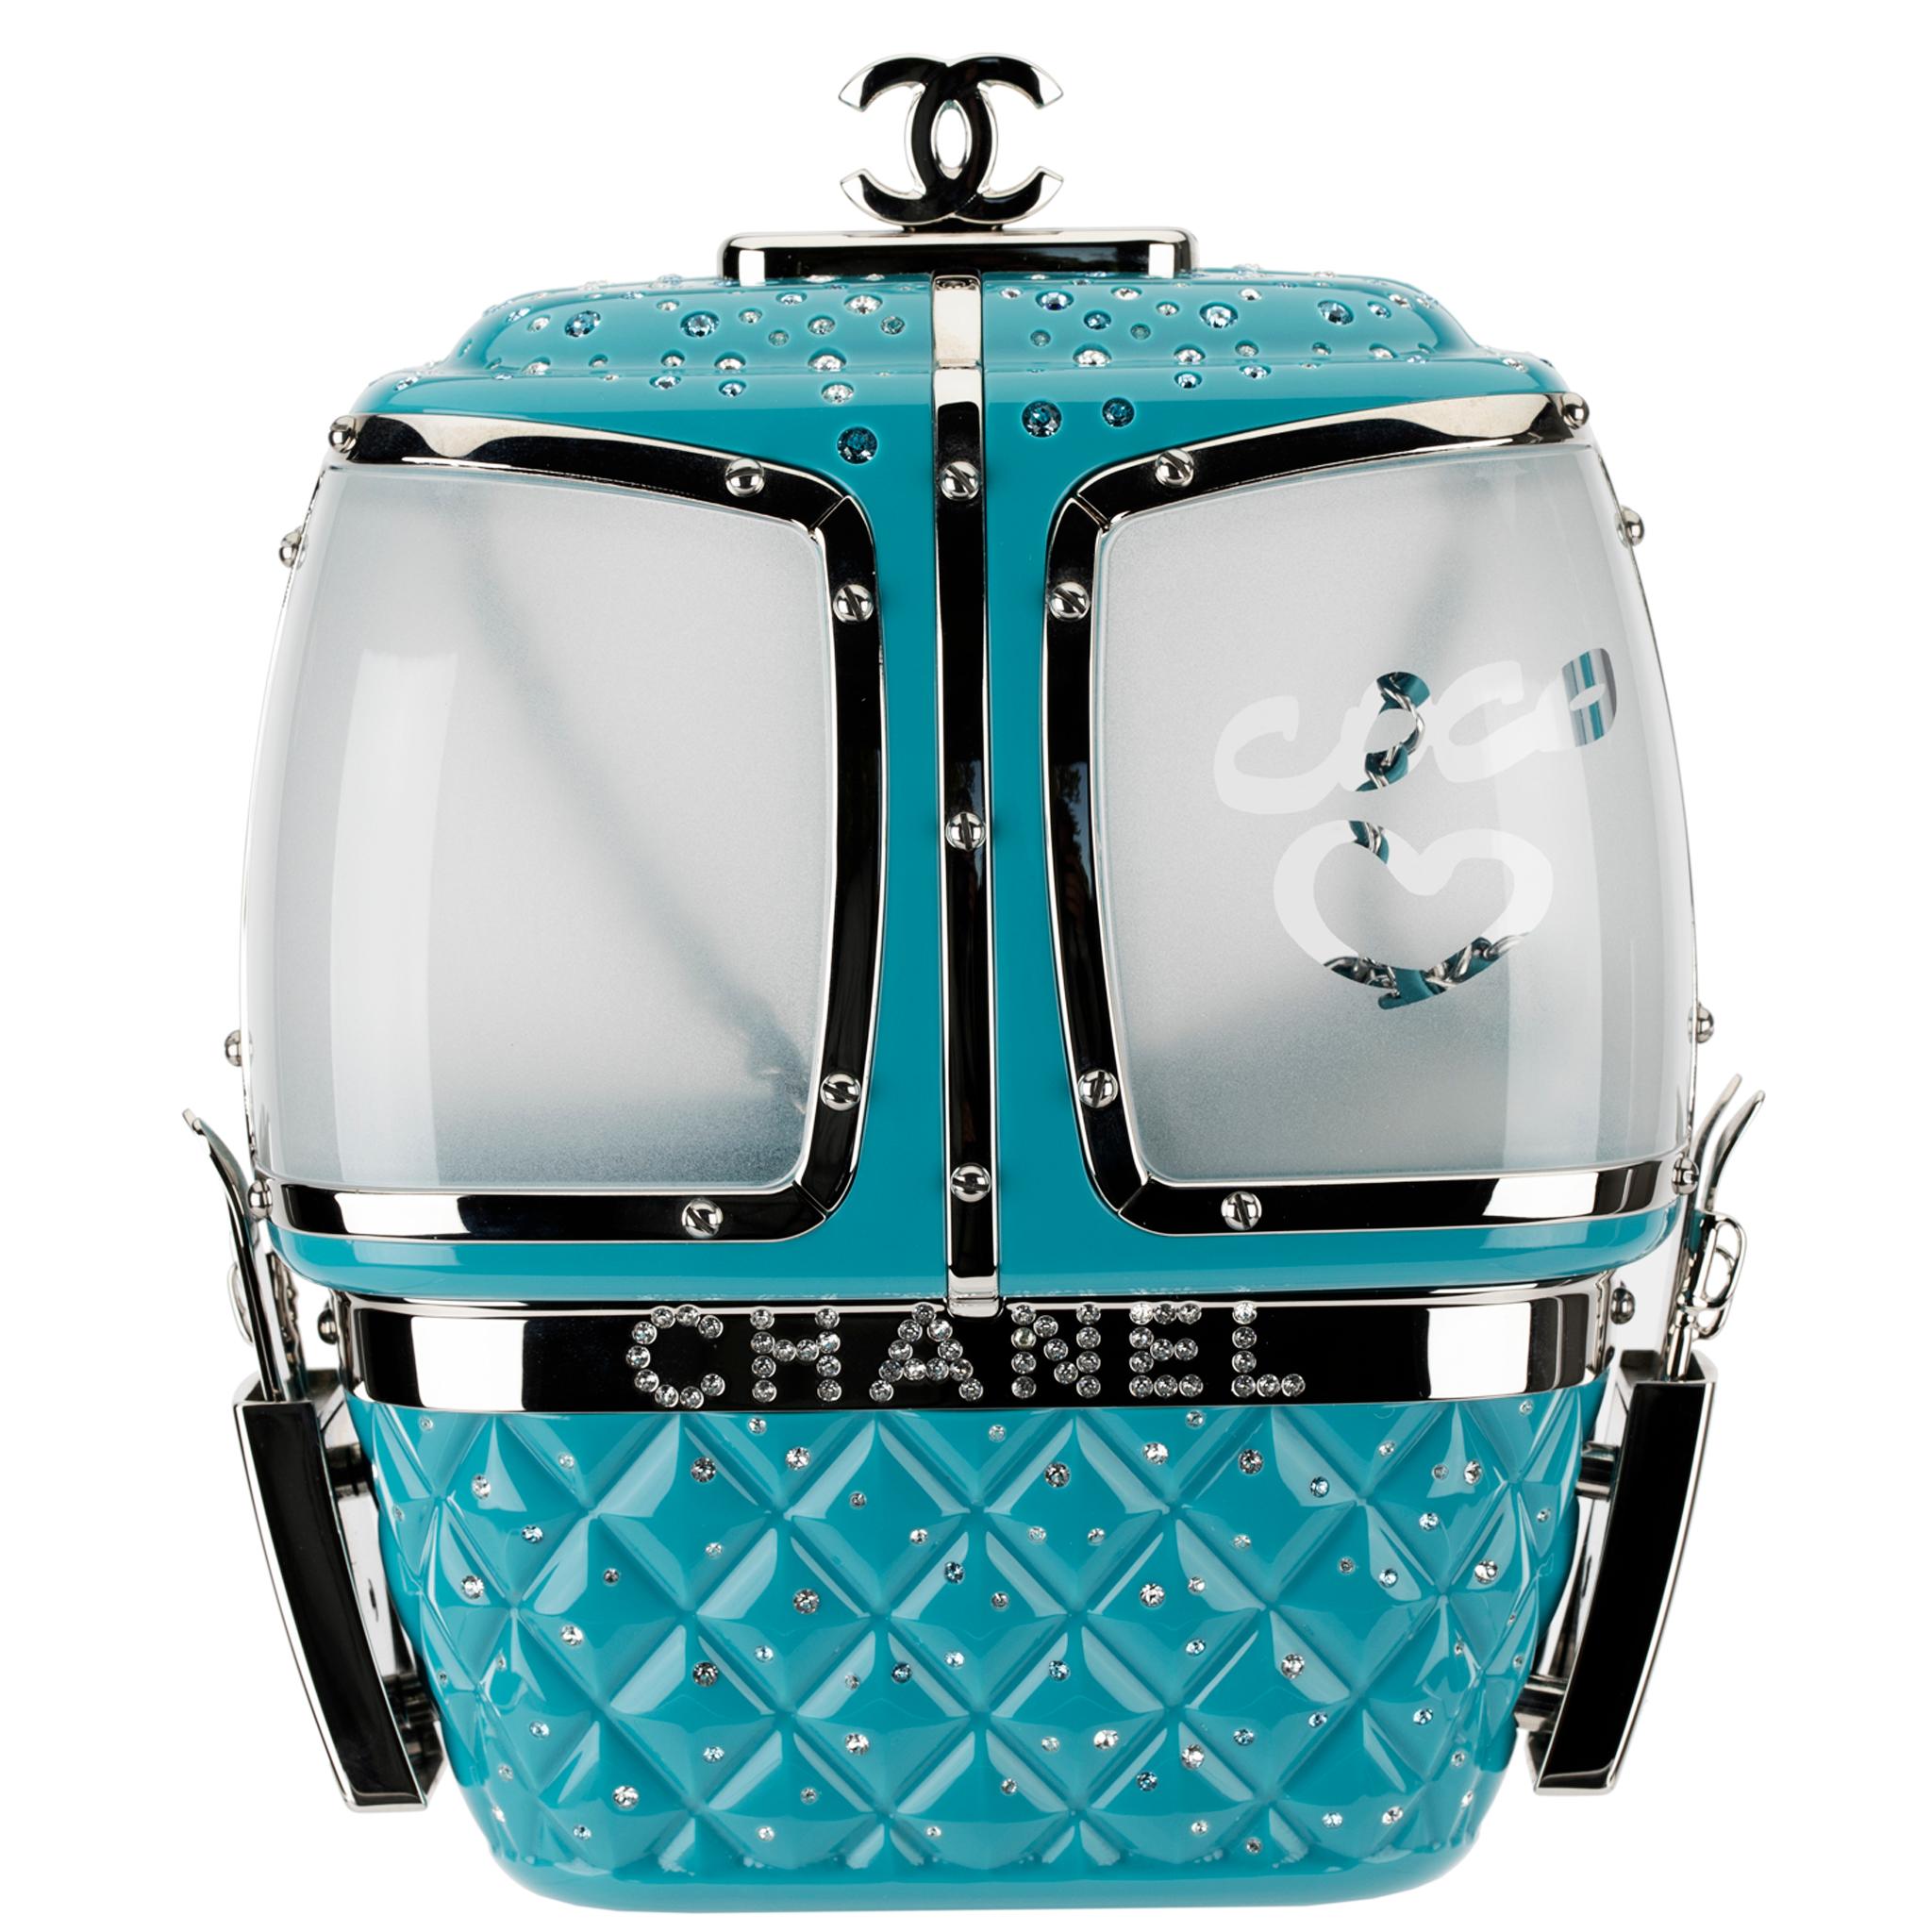 Chanel Minaudière Limited Edition Turquoise Snow Gondola Silver-Tone Hardware In New Condition In Sydney, New South Wales